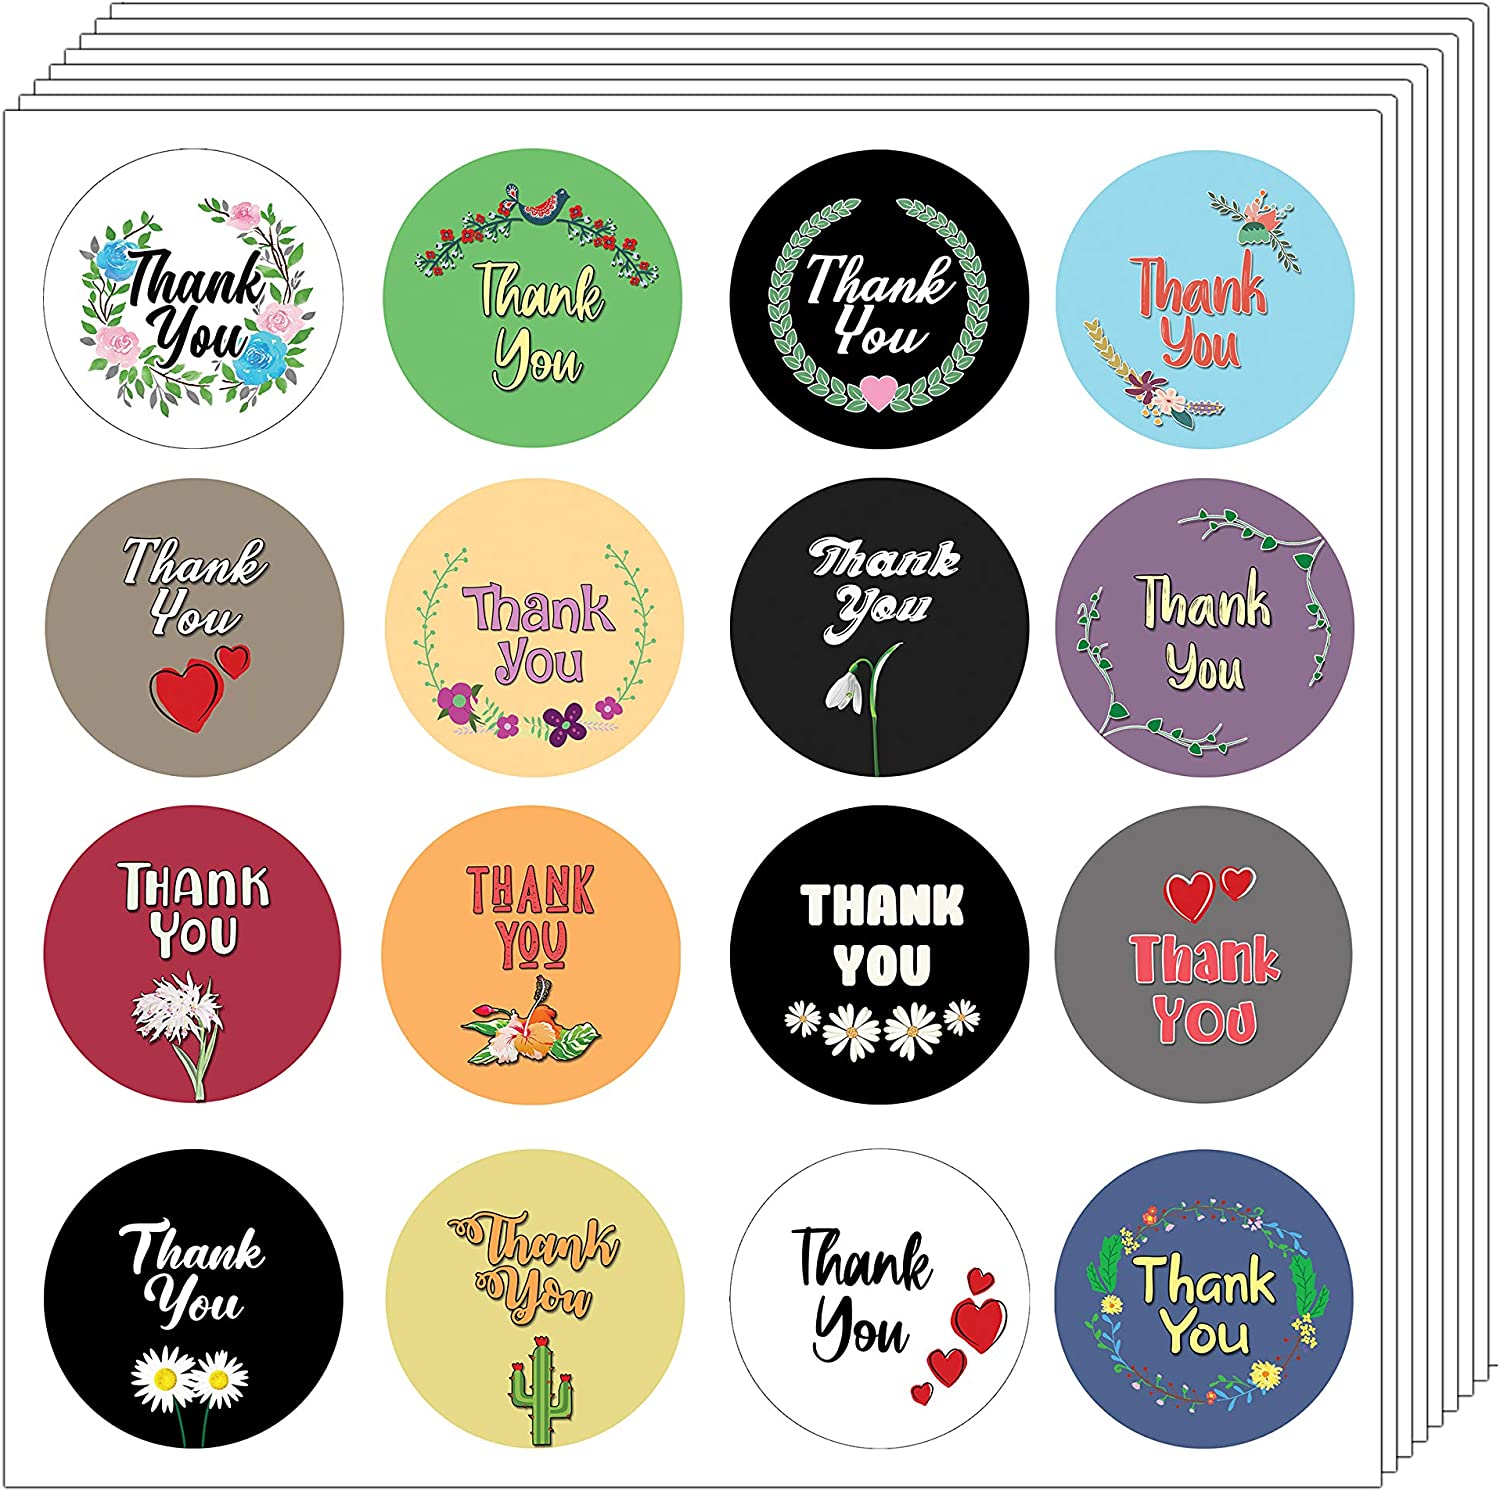 Thank You Stickers (10-Sheet) - 1.5 Round 16 Designs - for Birthdays, Weddings, Giveaways, Bridal Showers and Perfect for Small Business Owner - for Gifts Bags,Envelopes,Bubble mailers& Bags